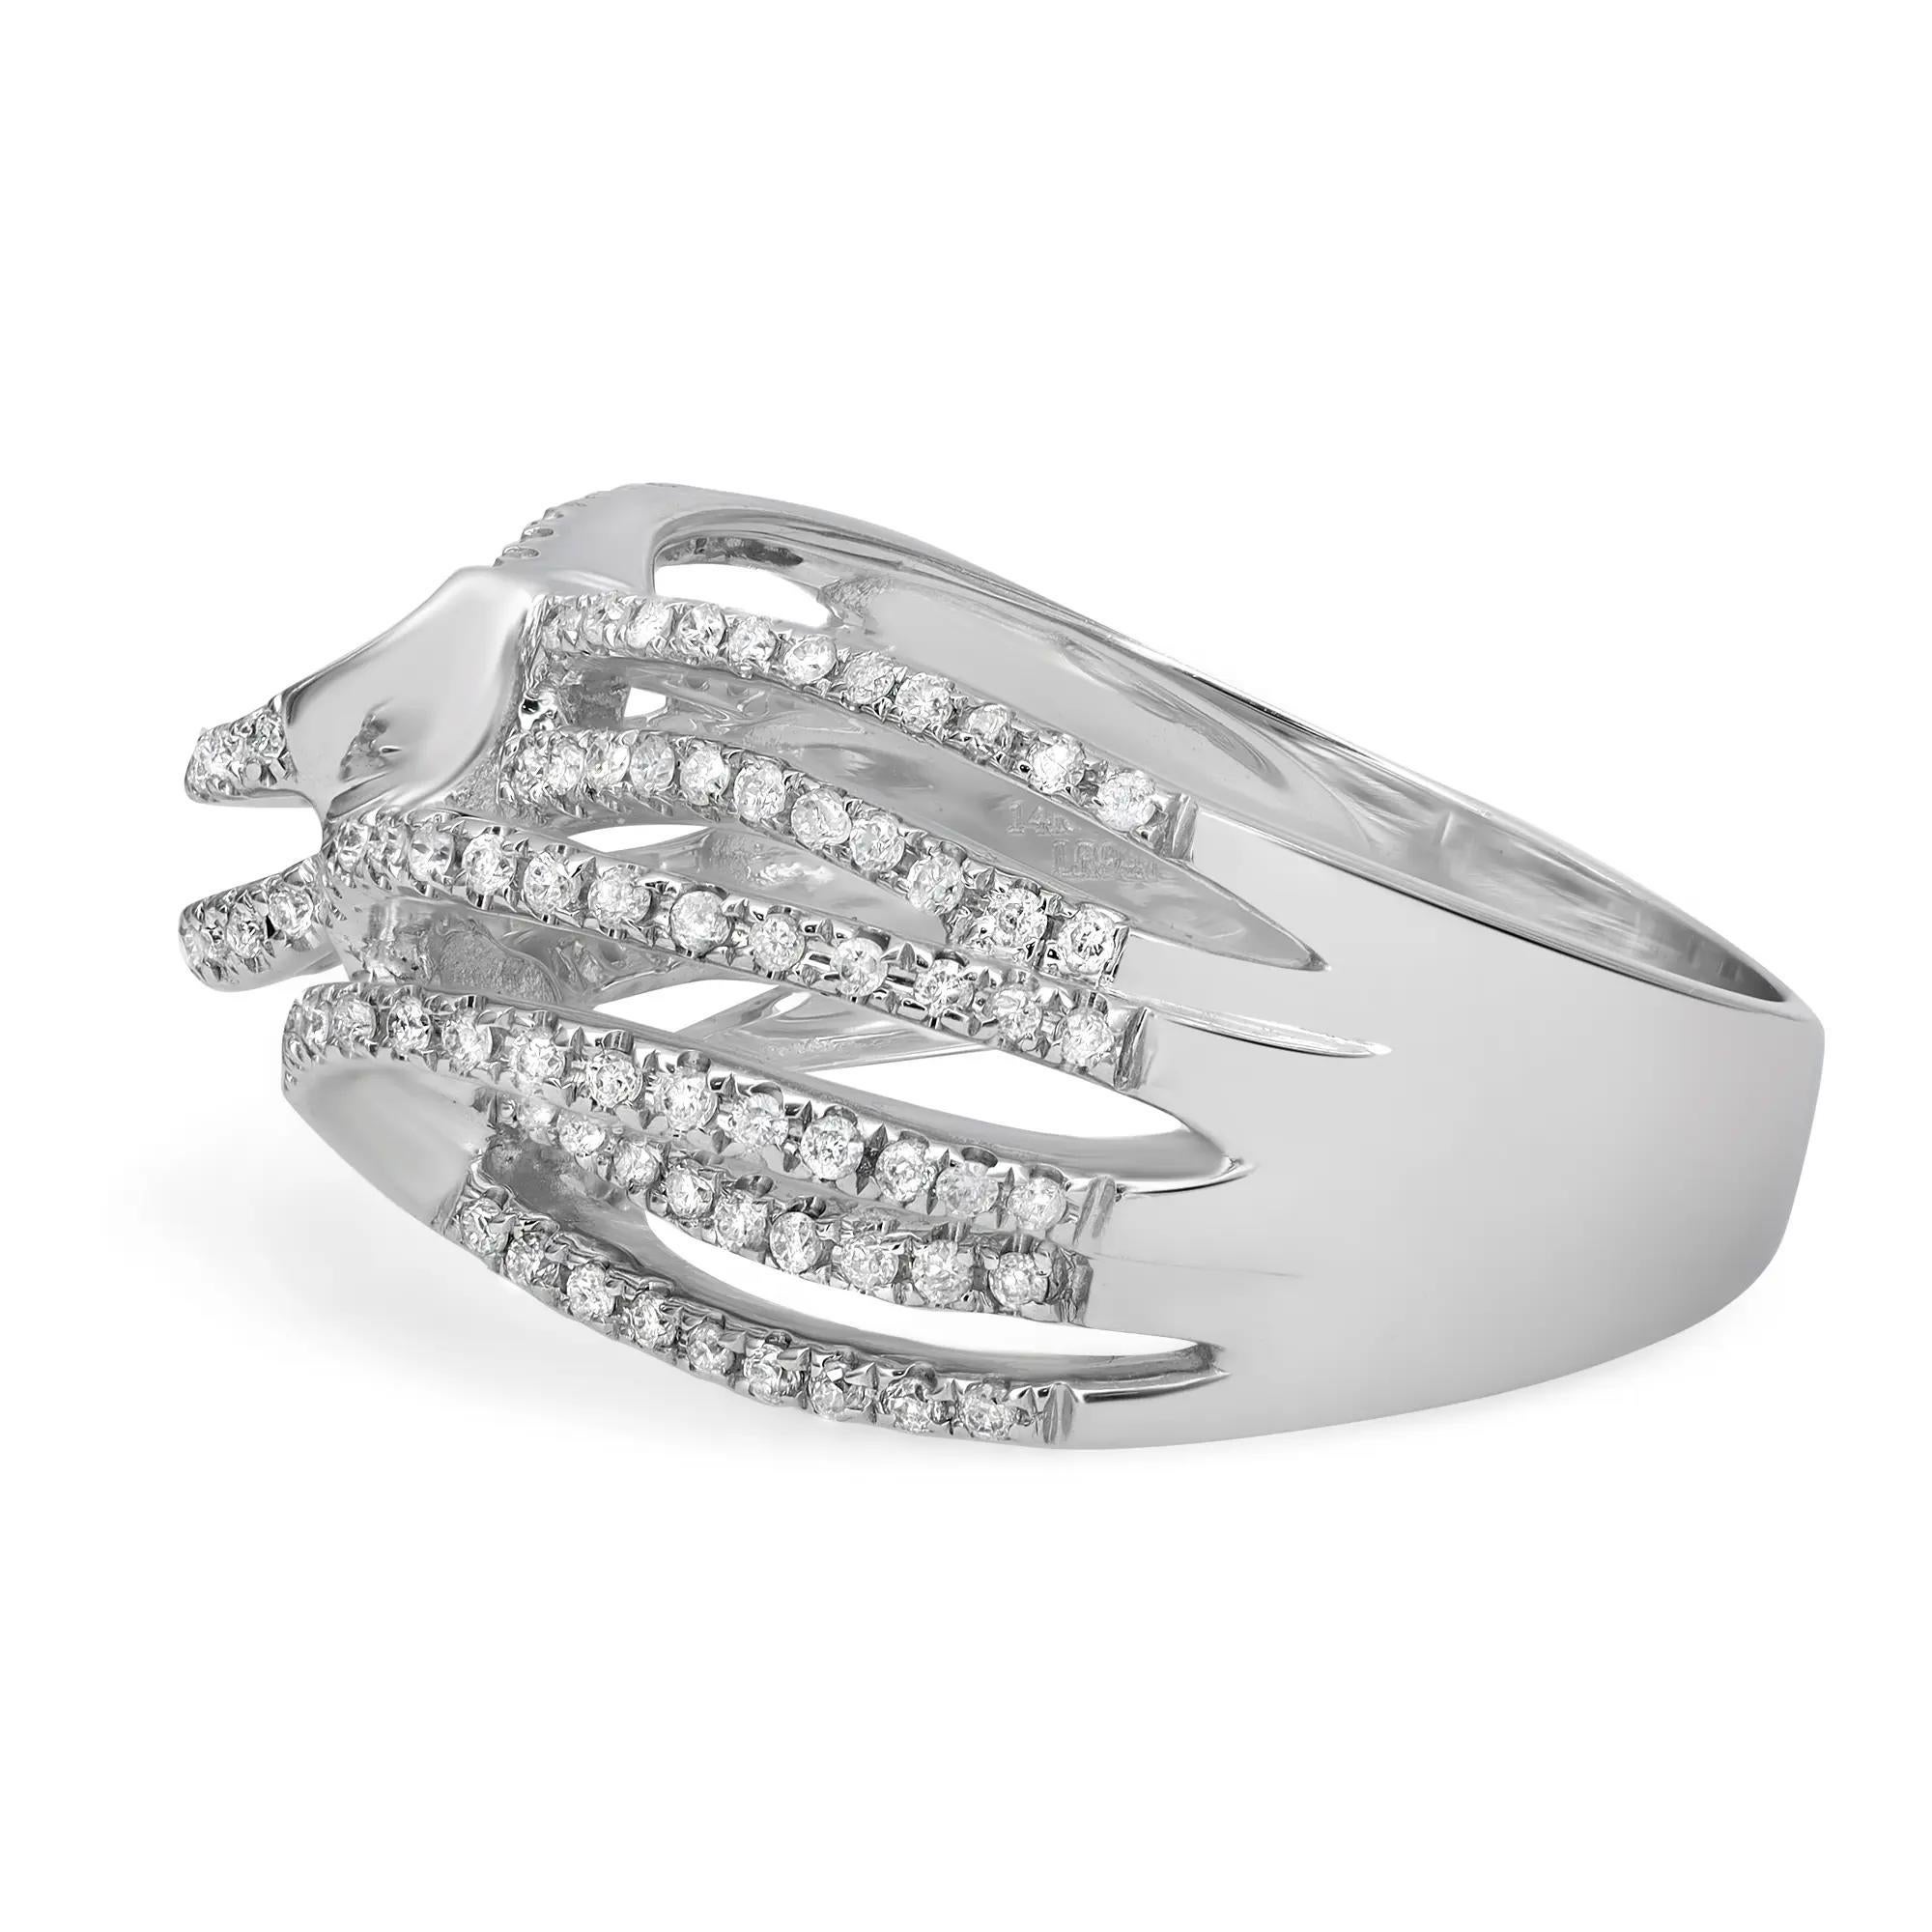 Fabulous and dramatic, this ladies cocktail ring is perfect for any occassion. Features prong set round cut diamonds weighing: 0.47 carat. Crafted in 14K white Gold. Ring size: 7.5 Total weight: 6.42 grams. Comes with a presentable gift box.